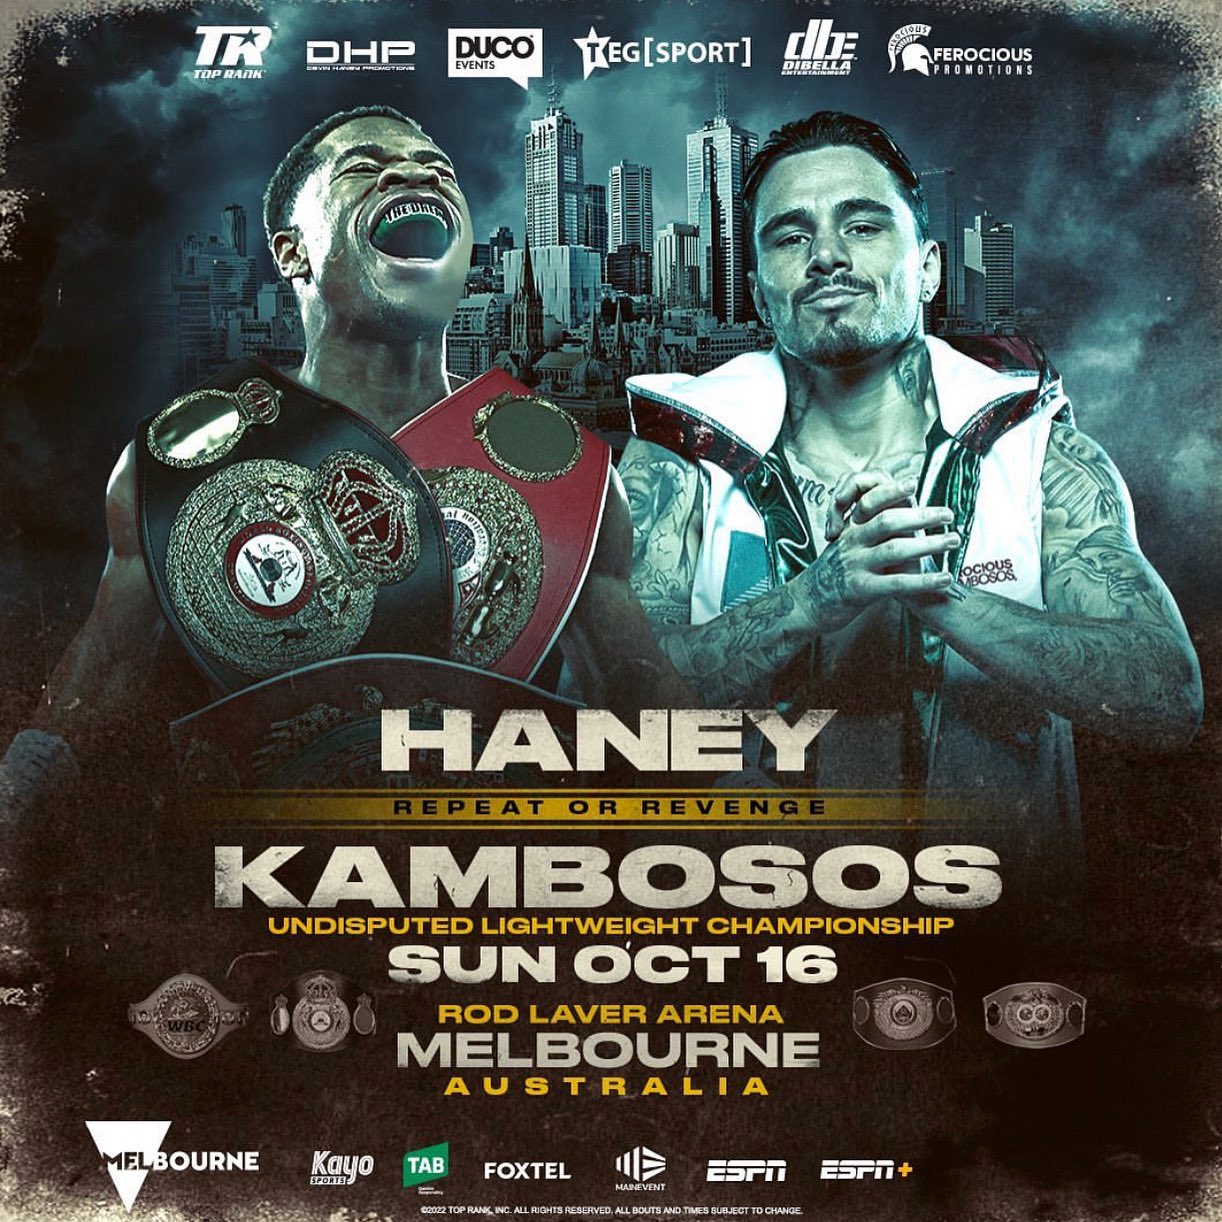 Haney-Kambosos 2 confirmed for Oct